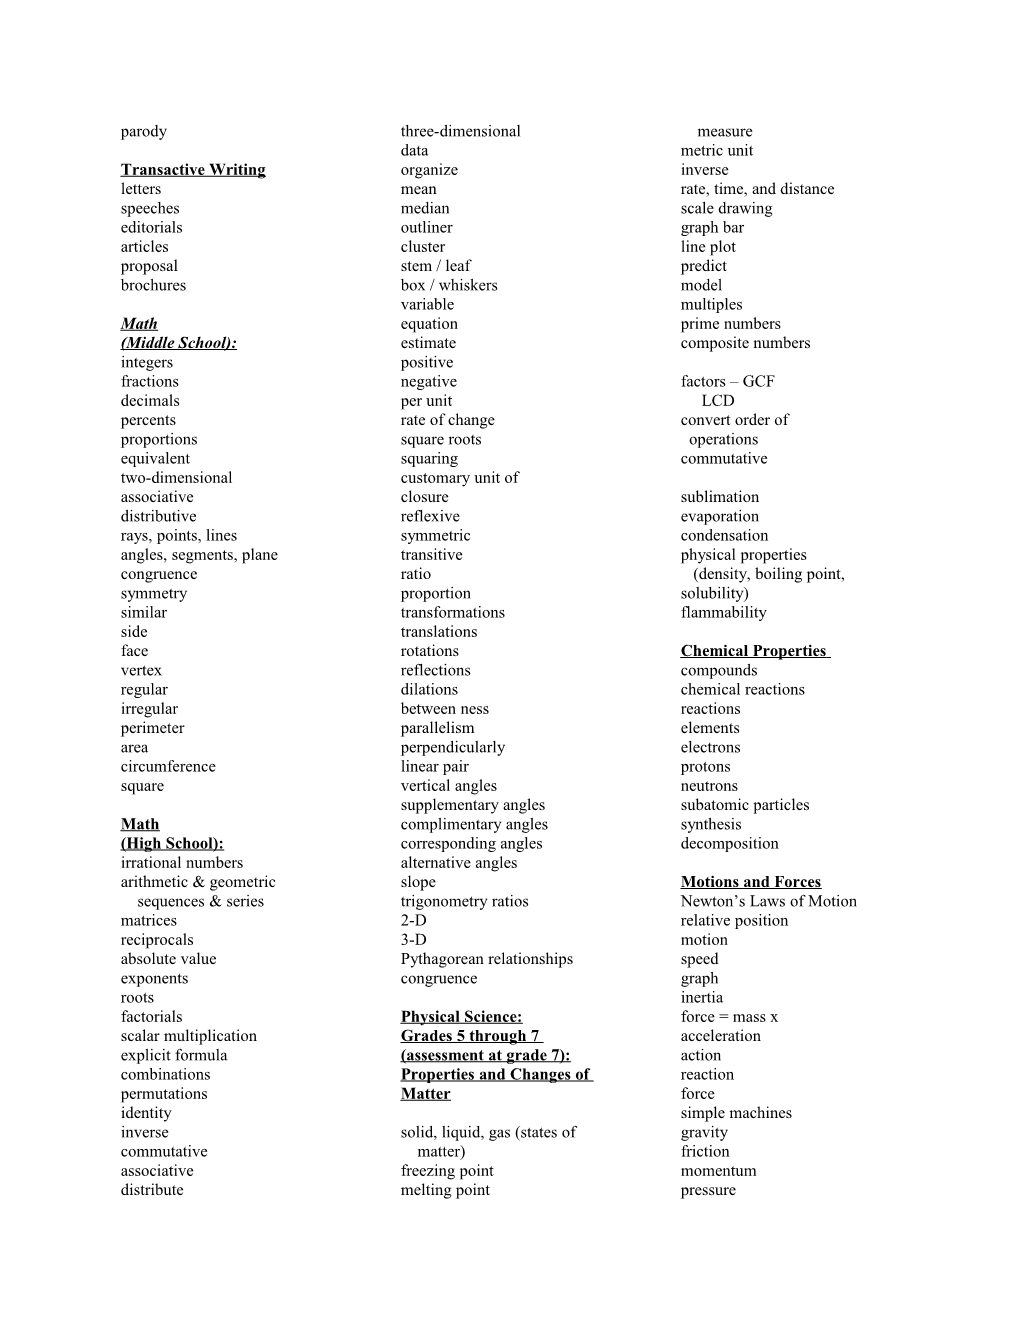 Reading Vocabulary(Middle School)